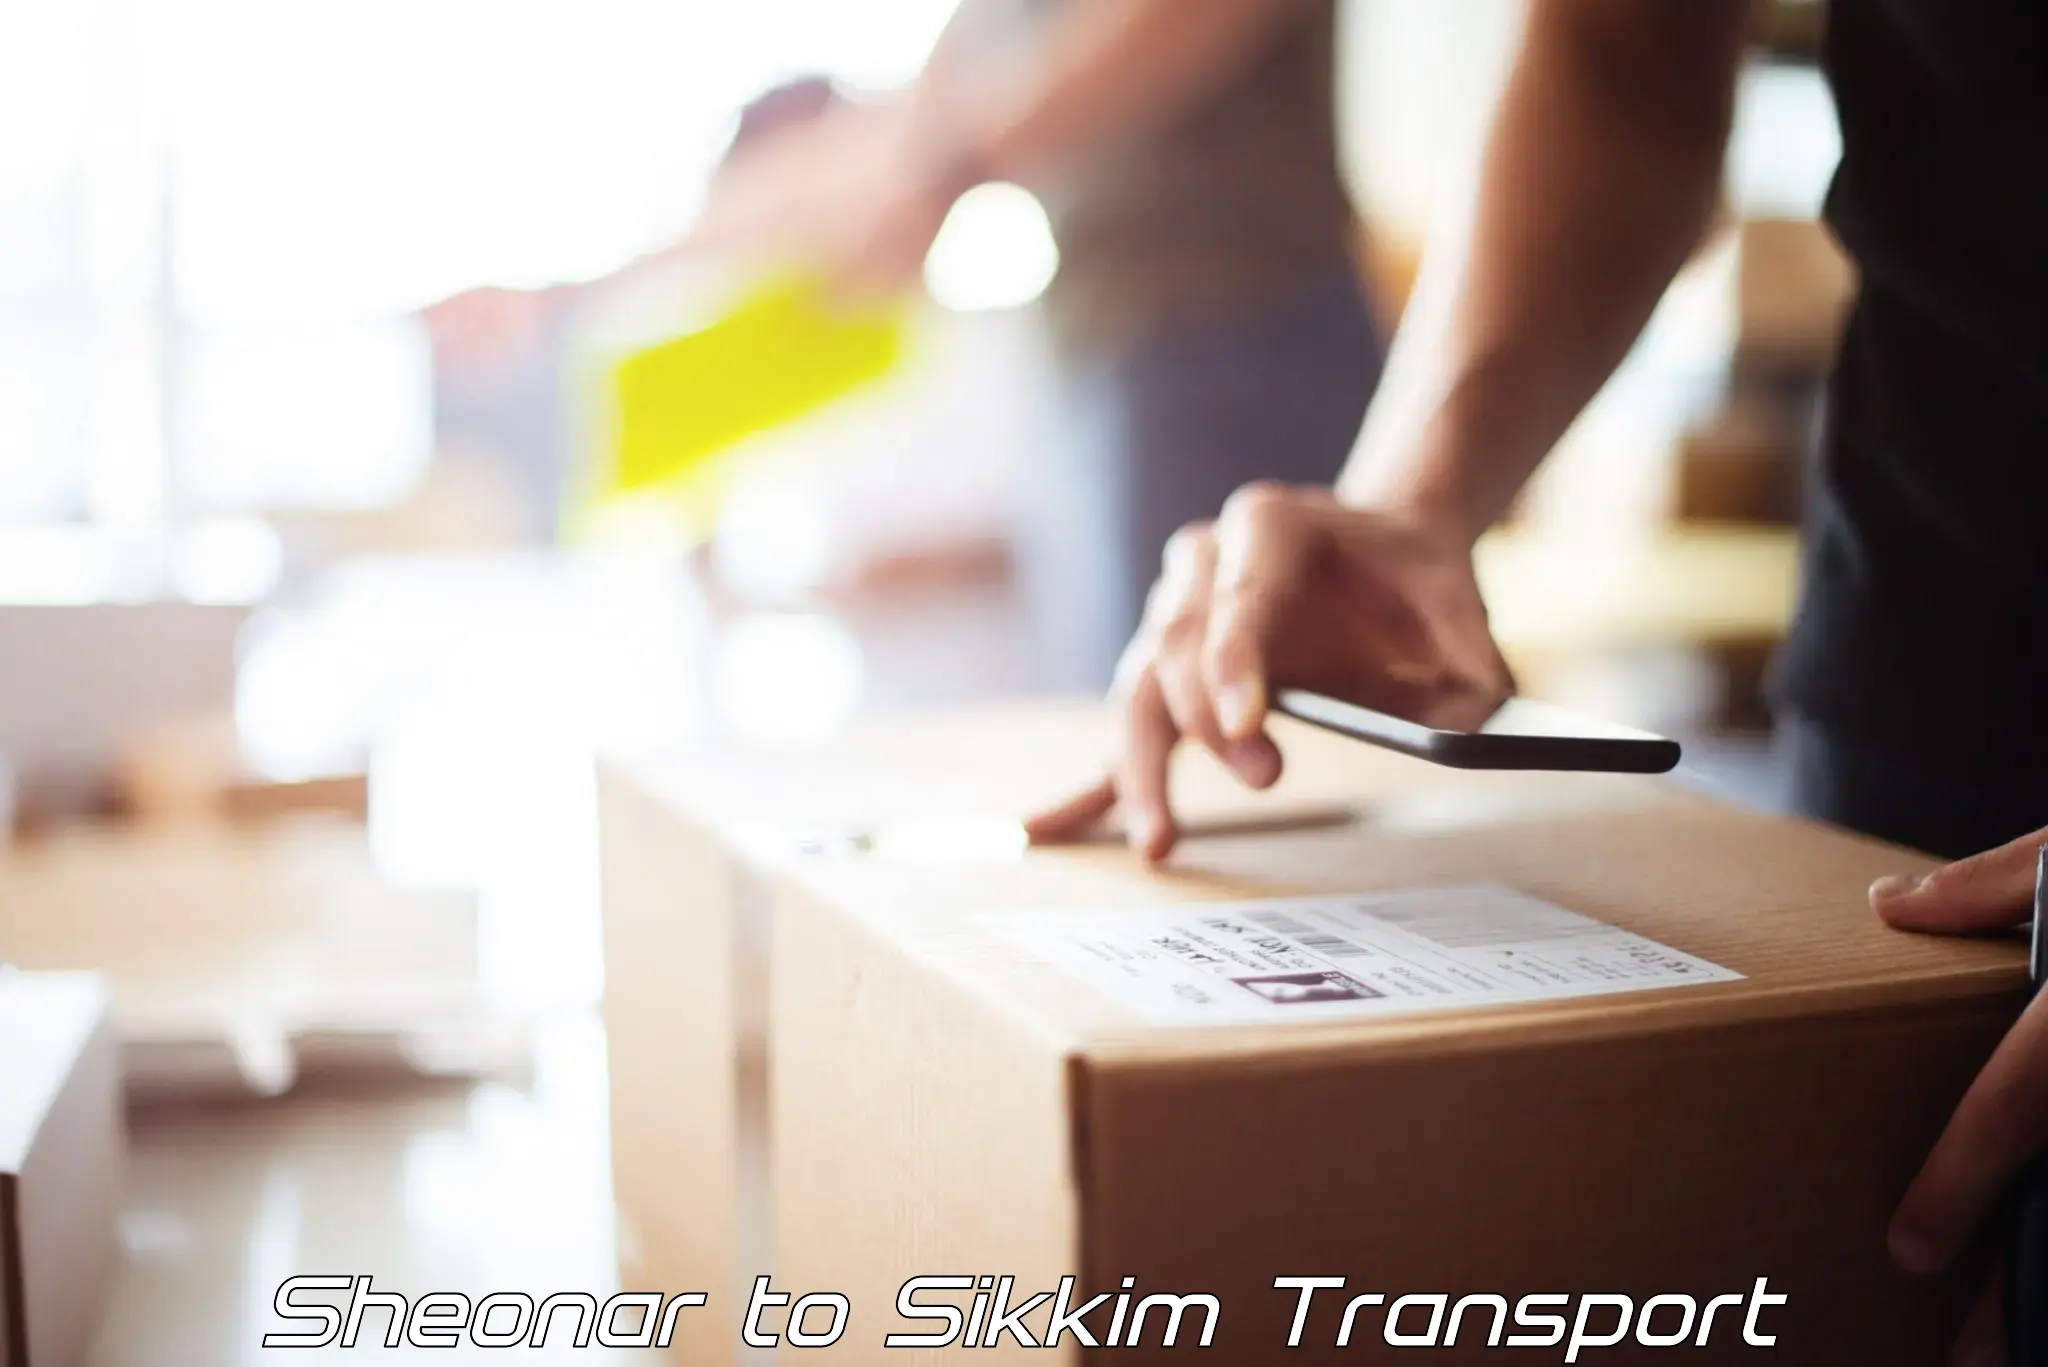 Online transport booking Sheonar to East Sikkim